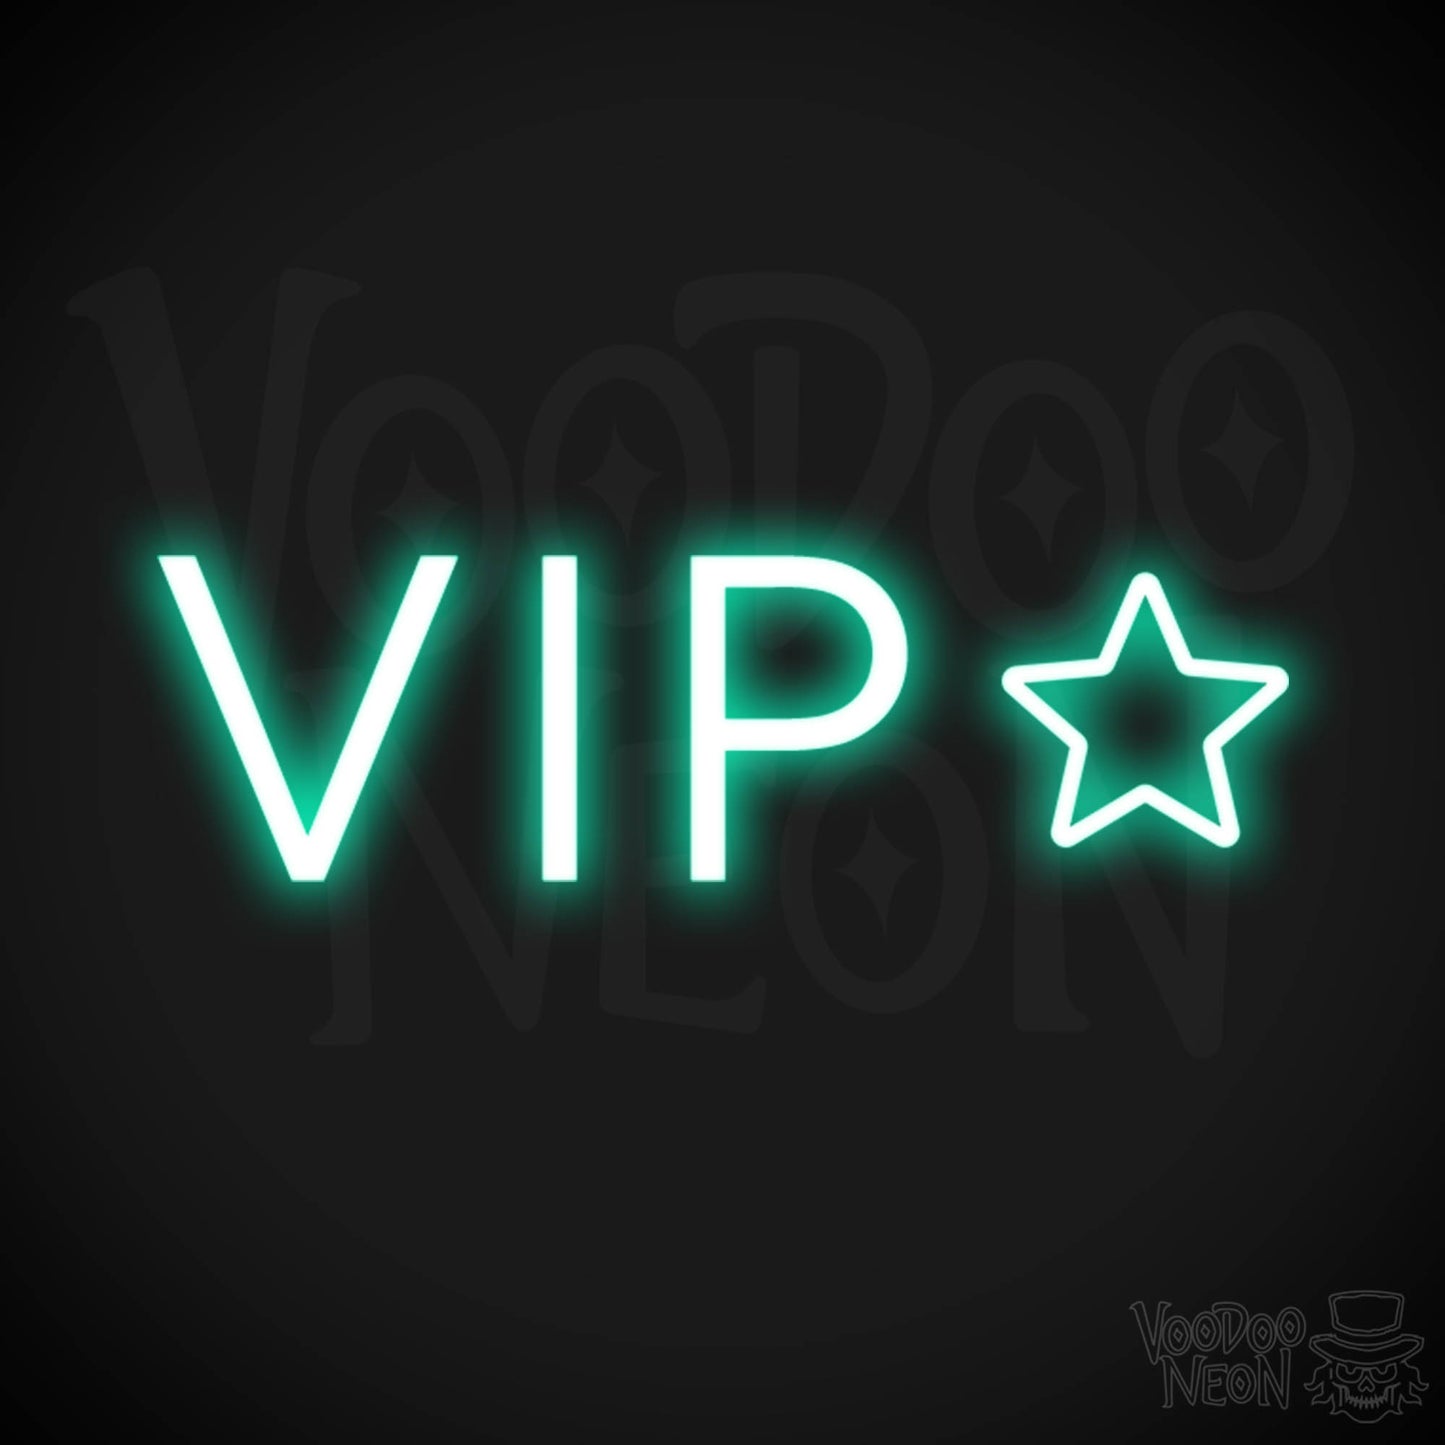 VIP Neon Sign - Neon VIP Sign - VIP LED Sign - Color Light Green